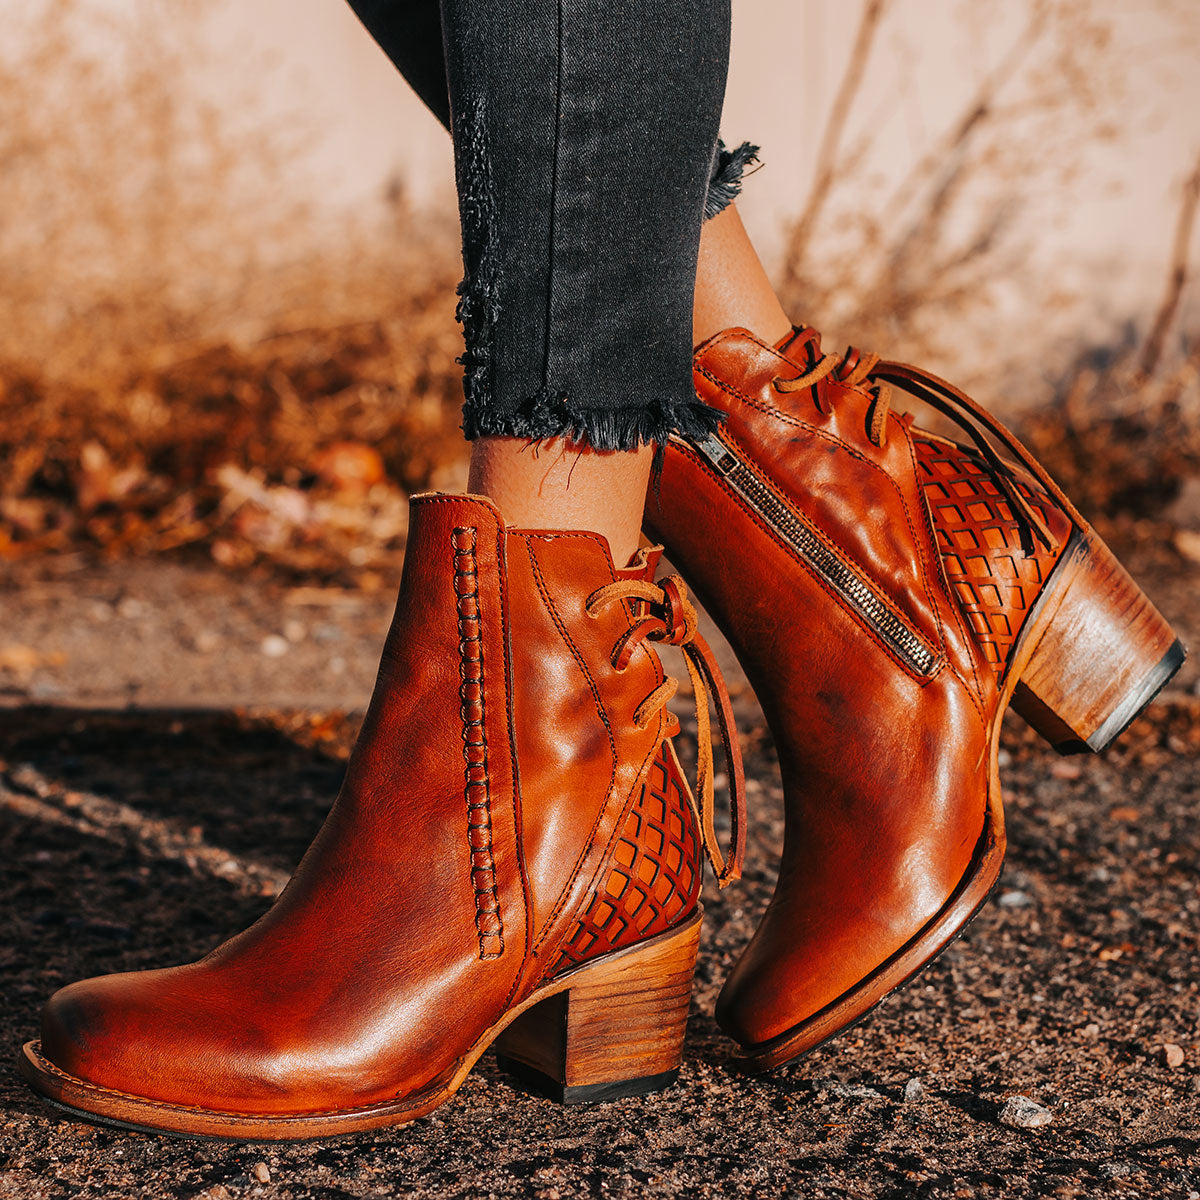 FREEBIRD women's Dreamer whiskey leather bootie with laser cut detailing, leather tie back straps, a stacked heel and square toe lifestyle